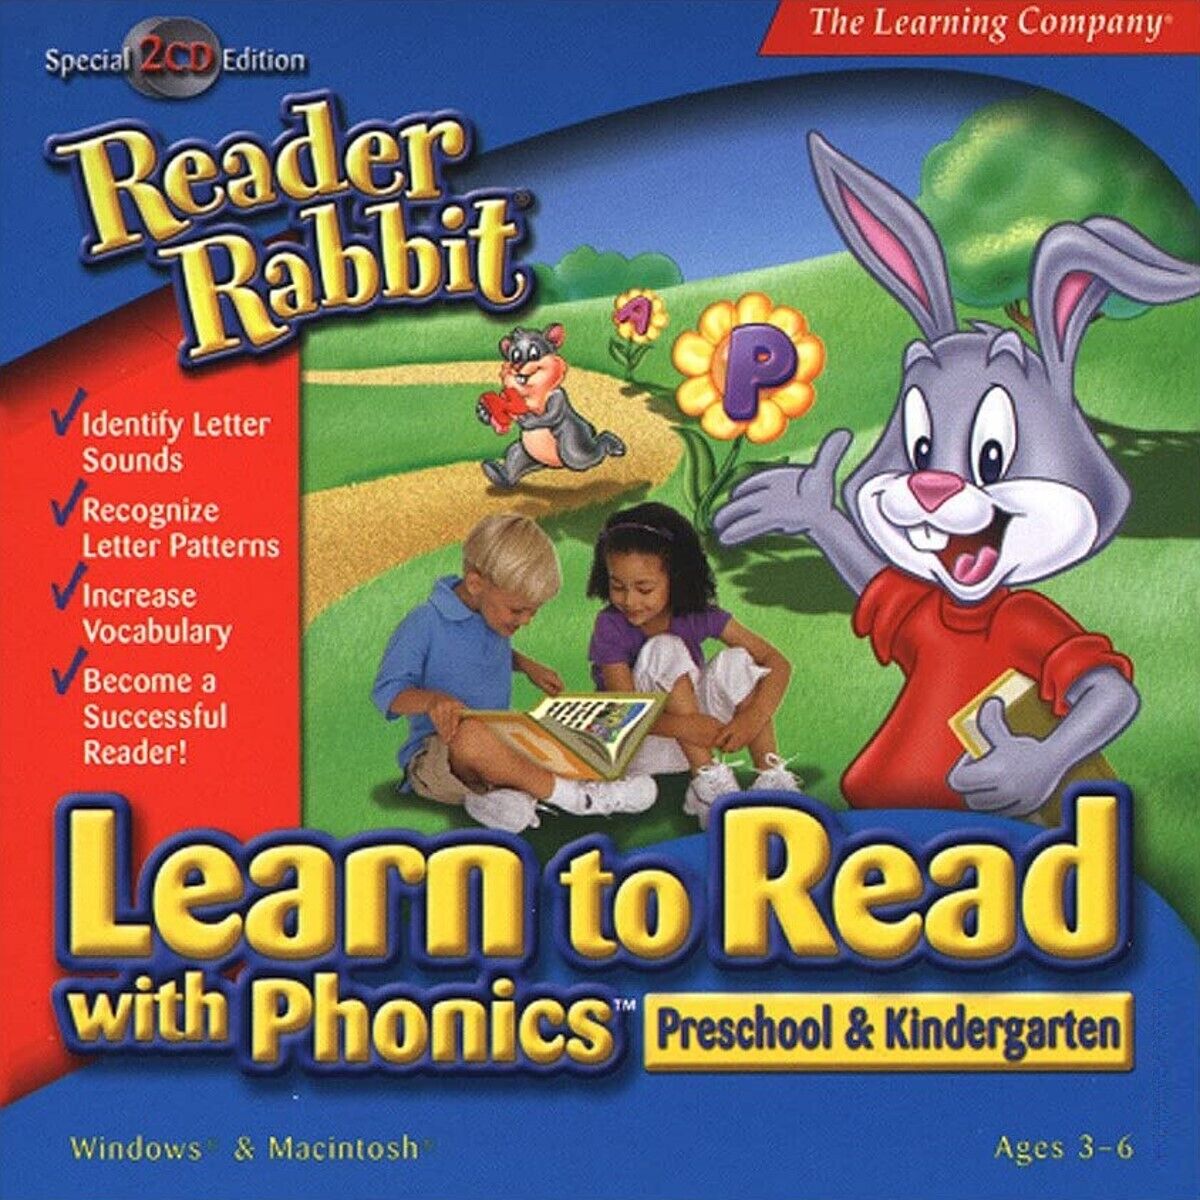 Reader Rabbit Learn to Read Phonics 1st - 2nd Ages 5-8 Learning Company Sealed